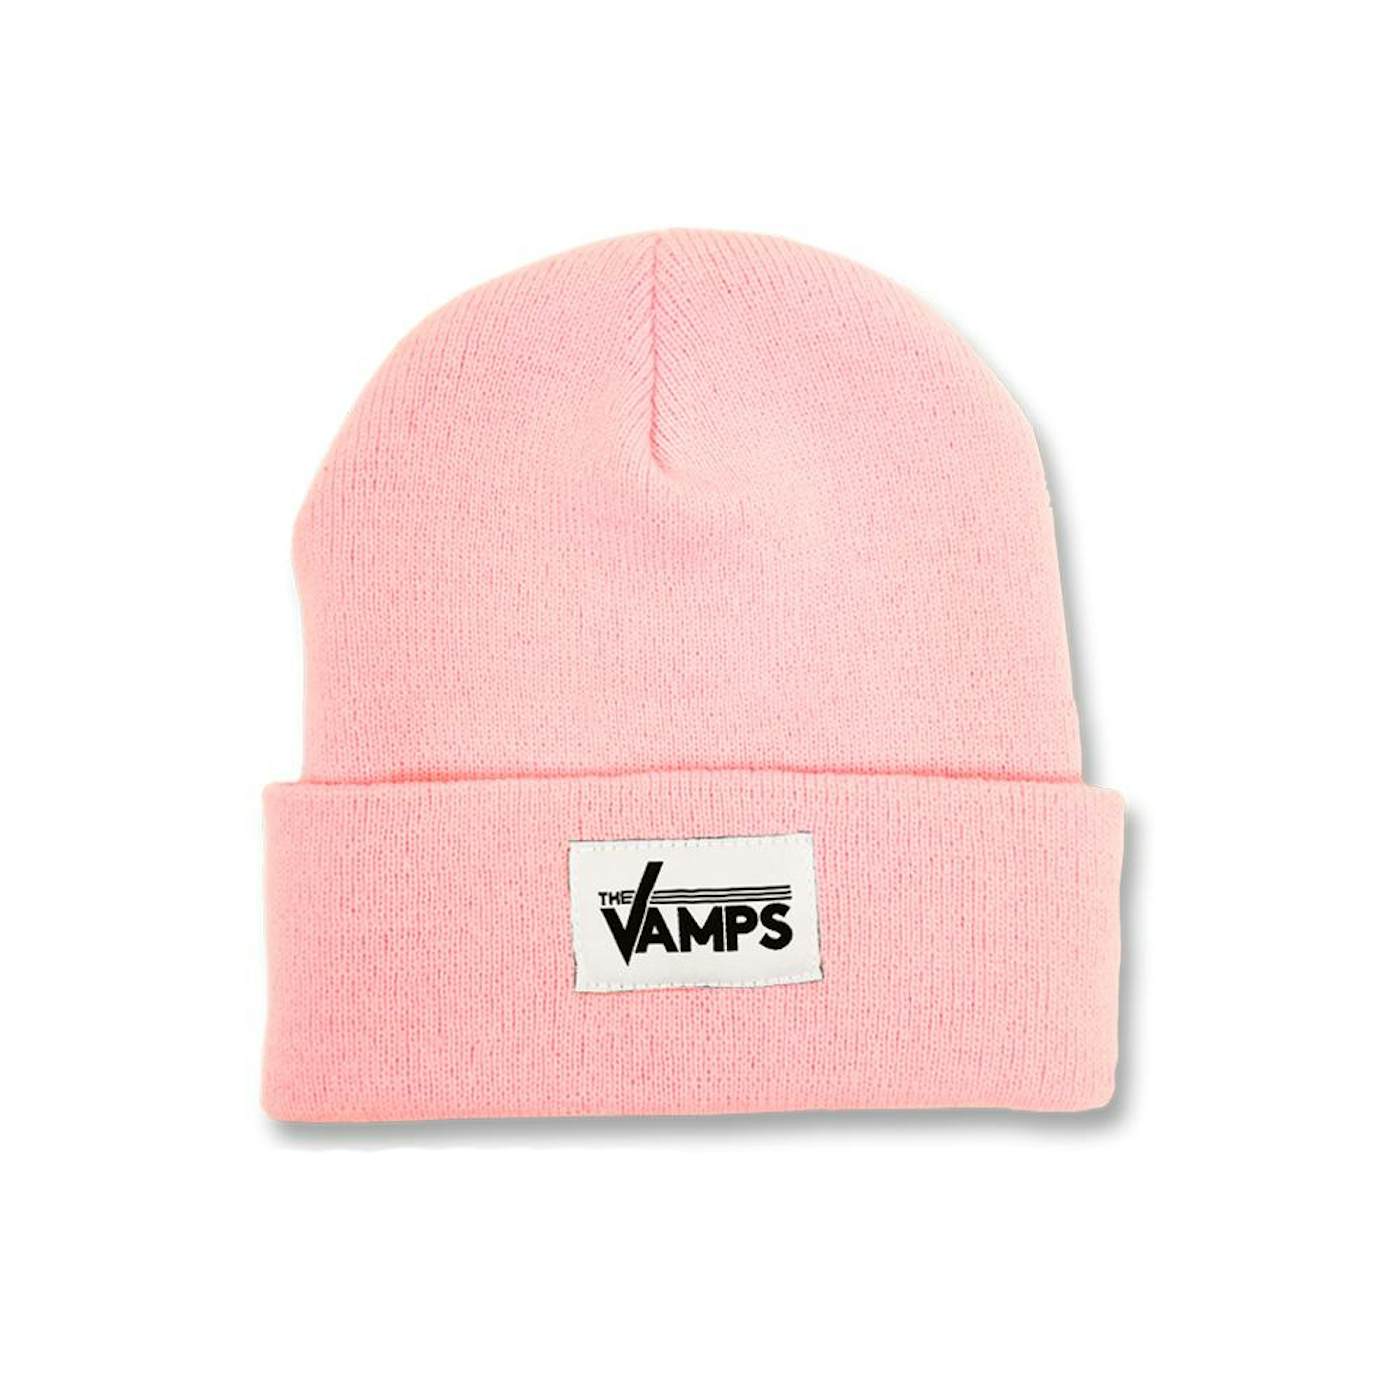 The Vamps Baby Pink Woven Label Beanie